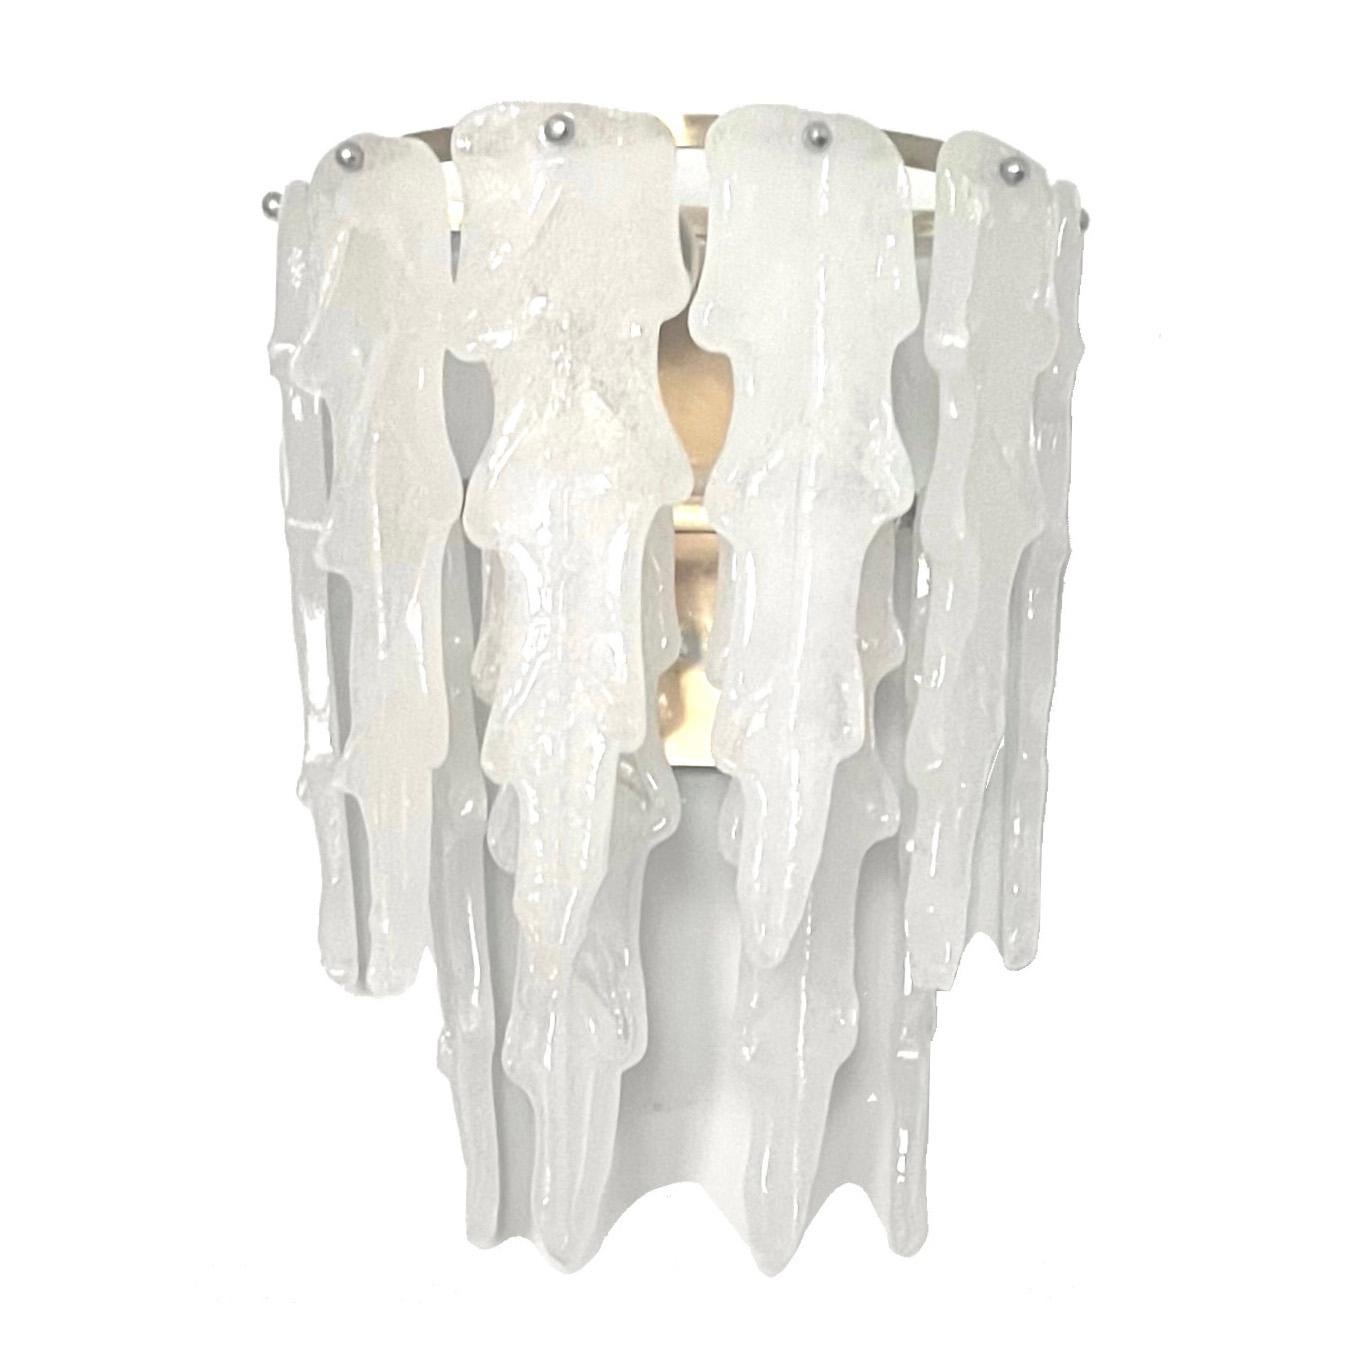 Unique, beauty and large Pair of Italian white Murano glass wall sconces from 1970s.
These wall sconces were made during the 1970s in Italy for the Venice Company 